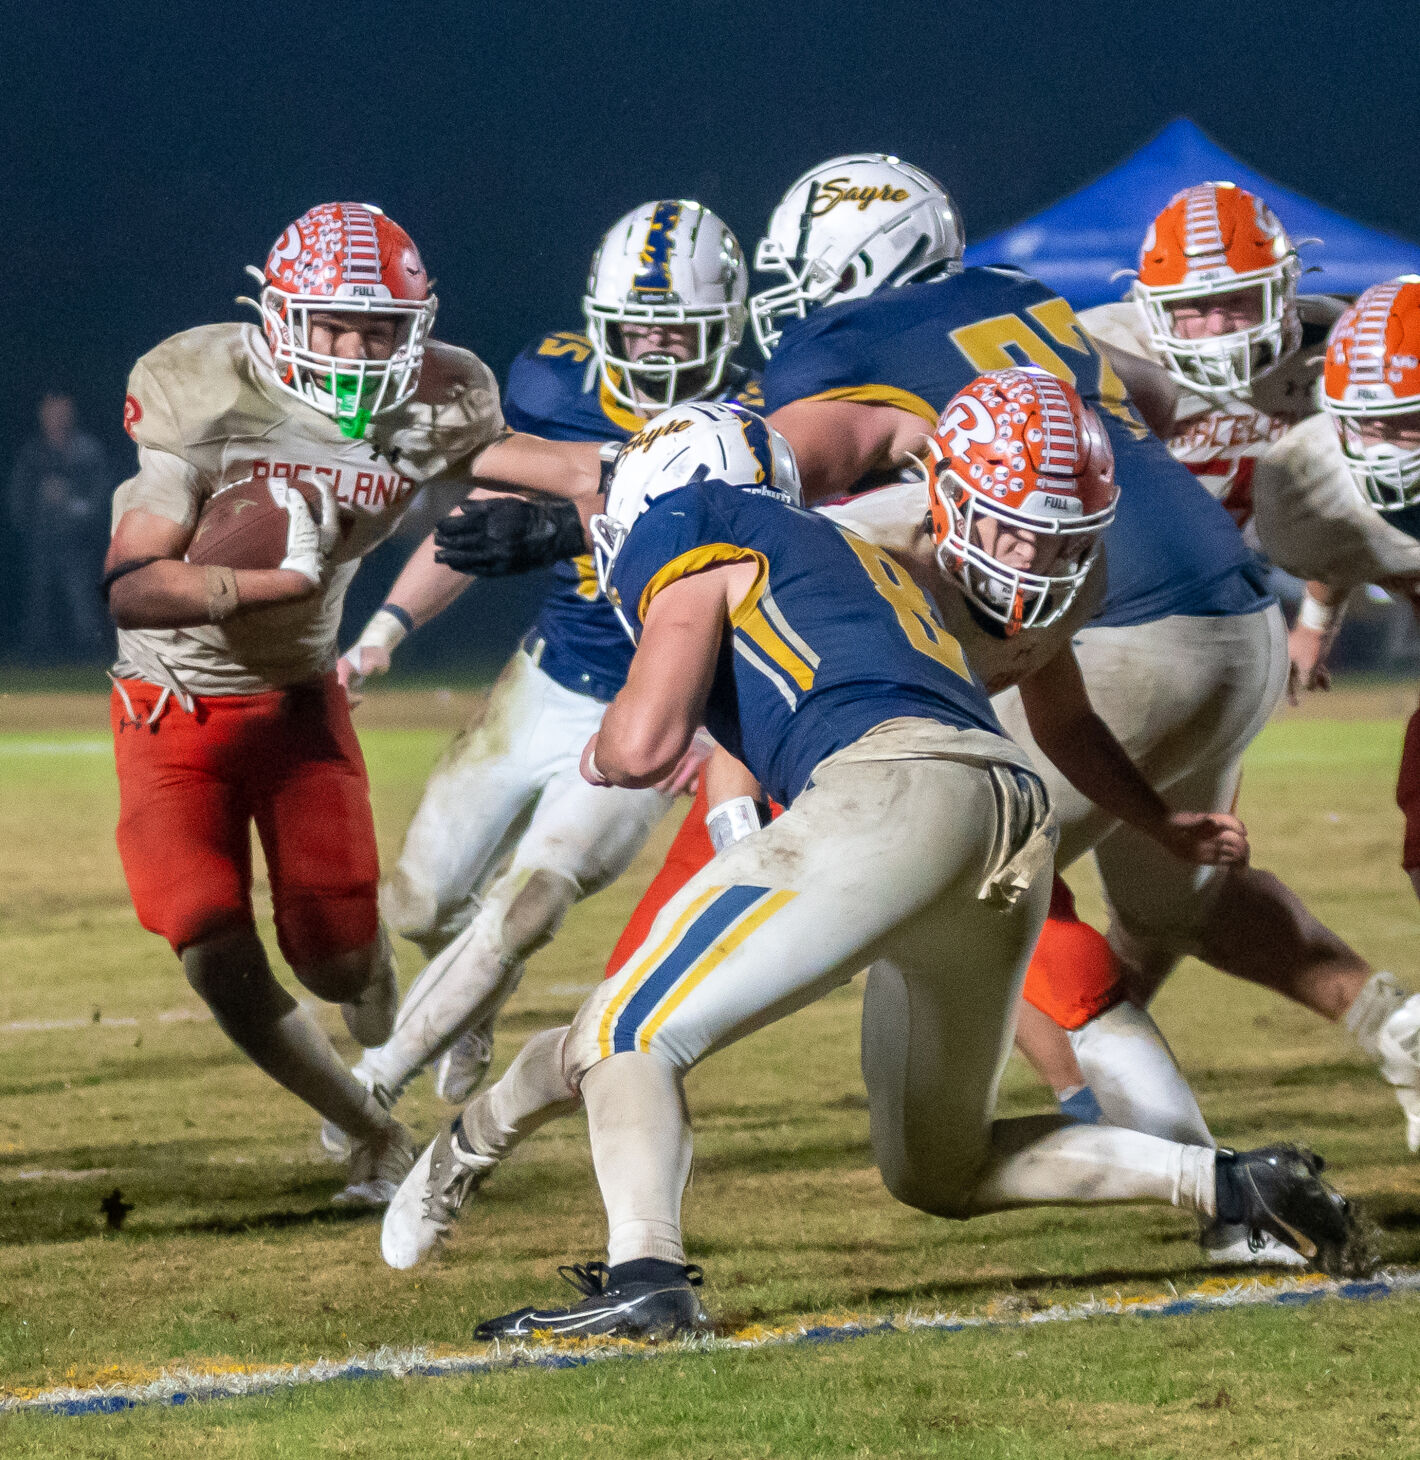 Raceland Rams Secure Third Consecutive Regional Championship with Dominant Rushing Performance